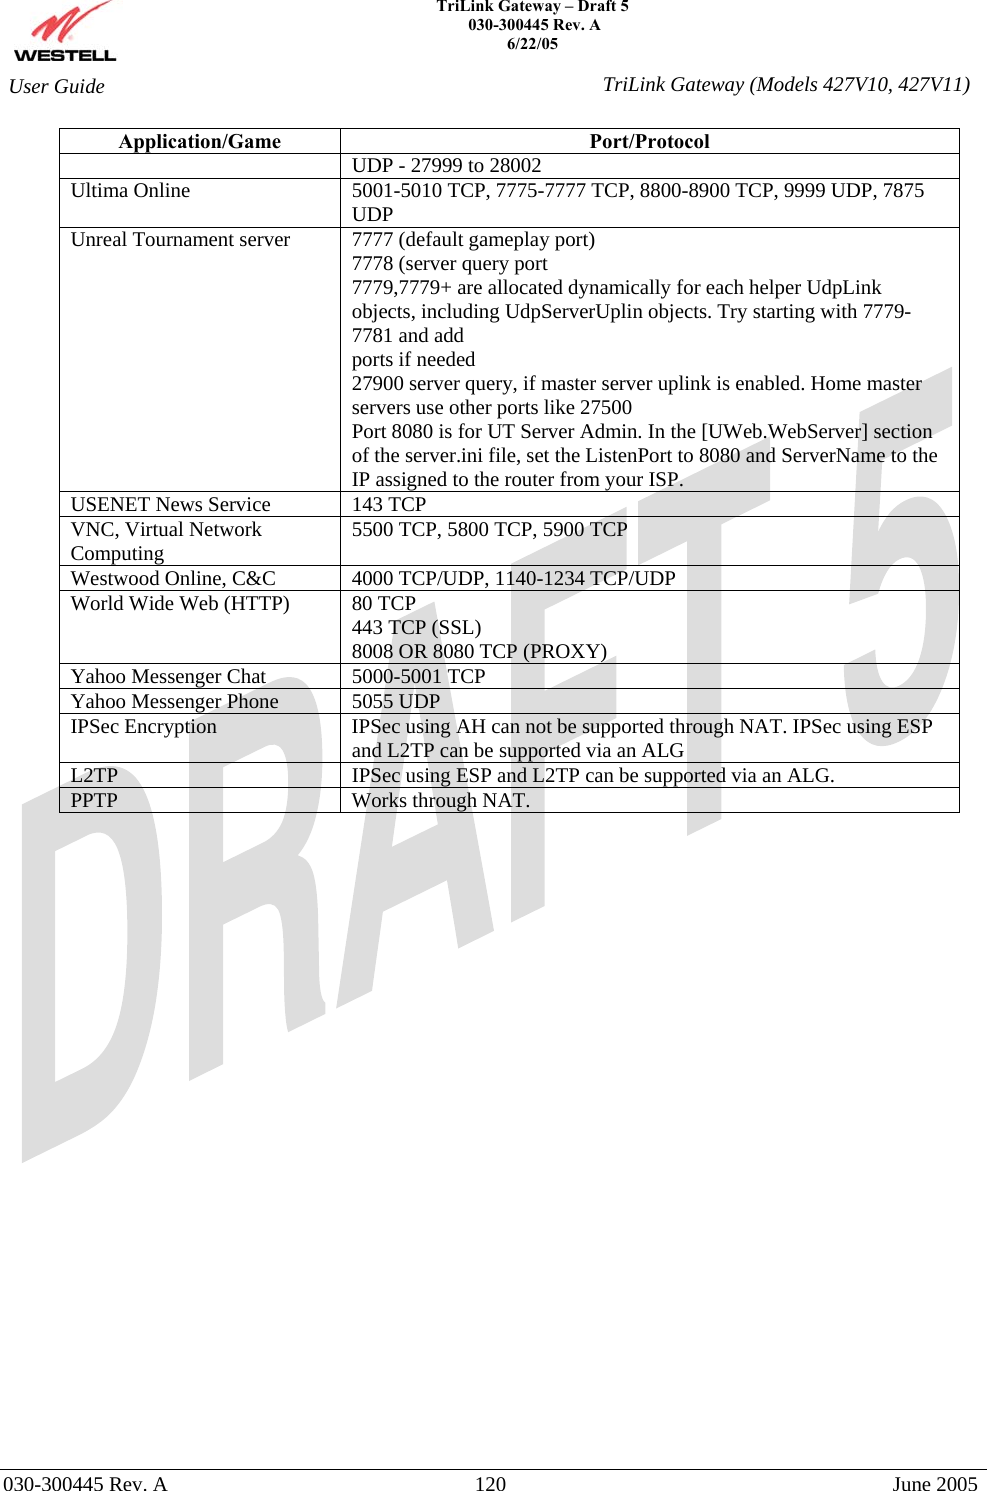    TriLink Gateway – Draft 5   030-300445 Rev. A 6/22/05   030-300445 Rev. A  120  June 2005  User Guide  TriLink Gateway (Models 427V10, 427V11)Application/Game Port/Protocol UDP - 27999 to 28002 Ultima Online  5001-5010 TCP, 7775-7777 TCP, 8800-8900 TCP, 9999 UDP, 7875 UDP Unreal Tournament server  7777 (default gameplay port) 7778 (server query port 7779,7779+ are allocated dynamically for each helper UdpLink objects, including UdpServerUplin objects. Try starting with 7779-7781 and add ports if needed 27900 server query, if master server uplink is enabled. Home master servers use other ports like 27500 Port 8080 is for UT Server Admin. In the [UWeb.WebServer] section of the server.ini file, set the ListenPort to 8080 and ServerName to the IP assigned to the router from your ISP. USENET News Service  143 TCP VNC, Virtual Network Computing  5500 TCP, 5800 TCP, 5900 TCP Westwood Online, C&amp;C  4000 TCP/UDP, 1140-1234 TCP/UDP World Wide Web (HTTP)  80 TCP 443 TCP (SSL) 8008 OR 8080 TCP (PROXY) Yahoo Messenger Chat  5000-5001 TCP Yahoo Messenger Phone  5055 UDP IPSec Encryption  IPSec using AH can not be supported through NAT. IPSec using ESP and L2TP can be supported via an ALG L2TP  IPSec using ESP and L2TP can be supported via an ALG. PPTP  Works through NAT.      